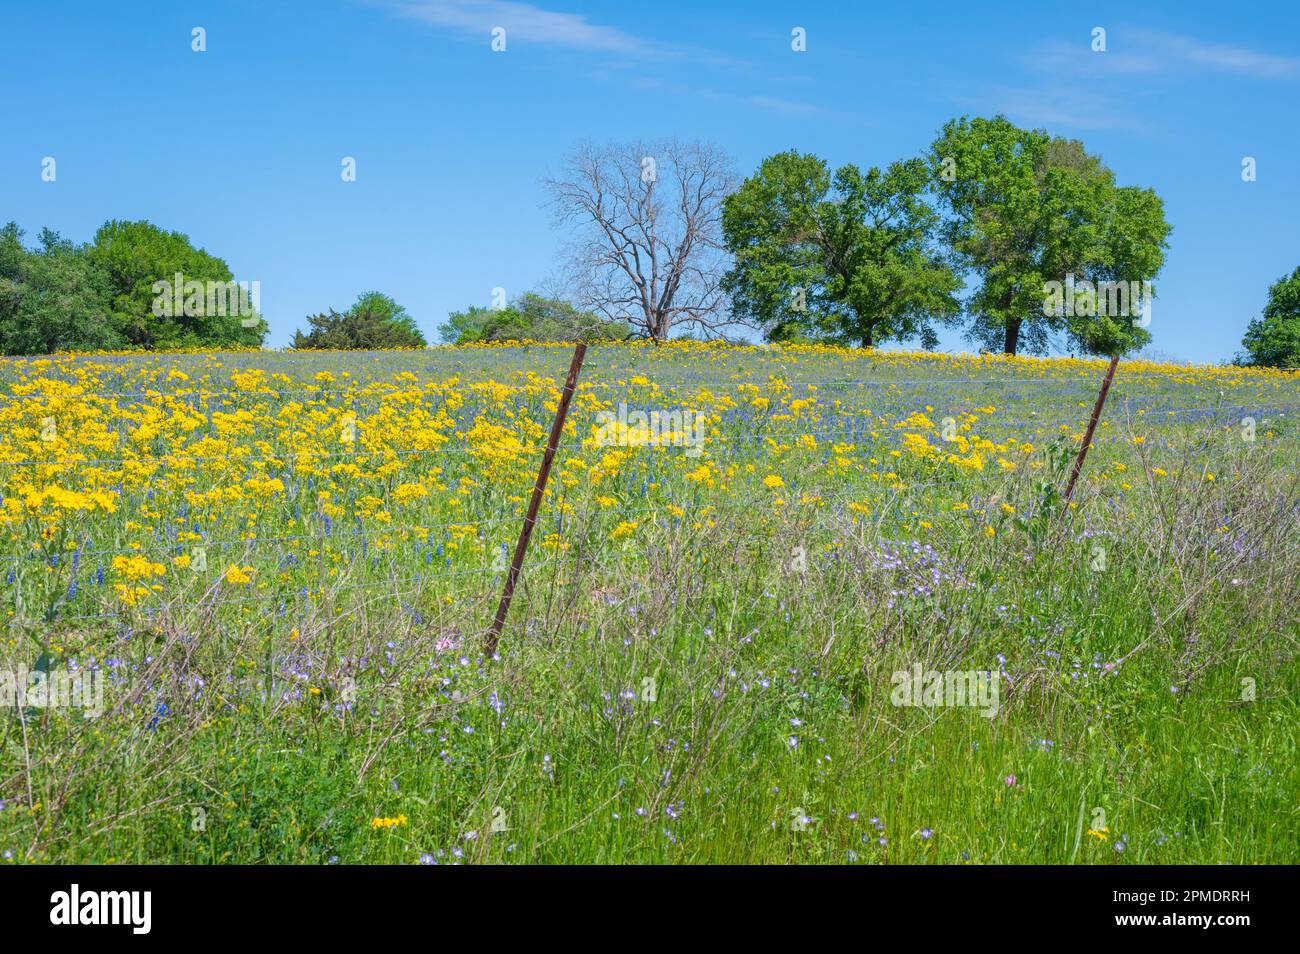 View of a wildflower meadow filled with Texas Groundsel and bluebonnets. Stock Photo